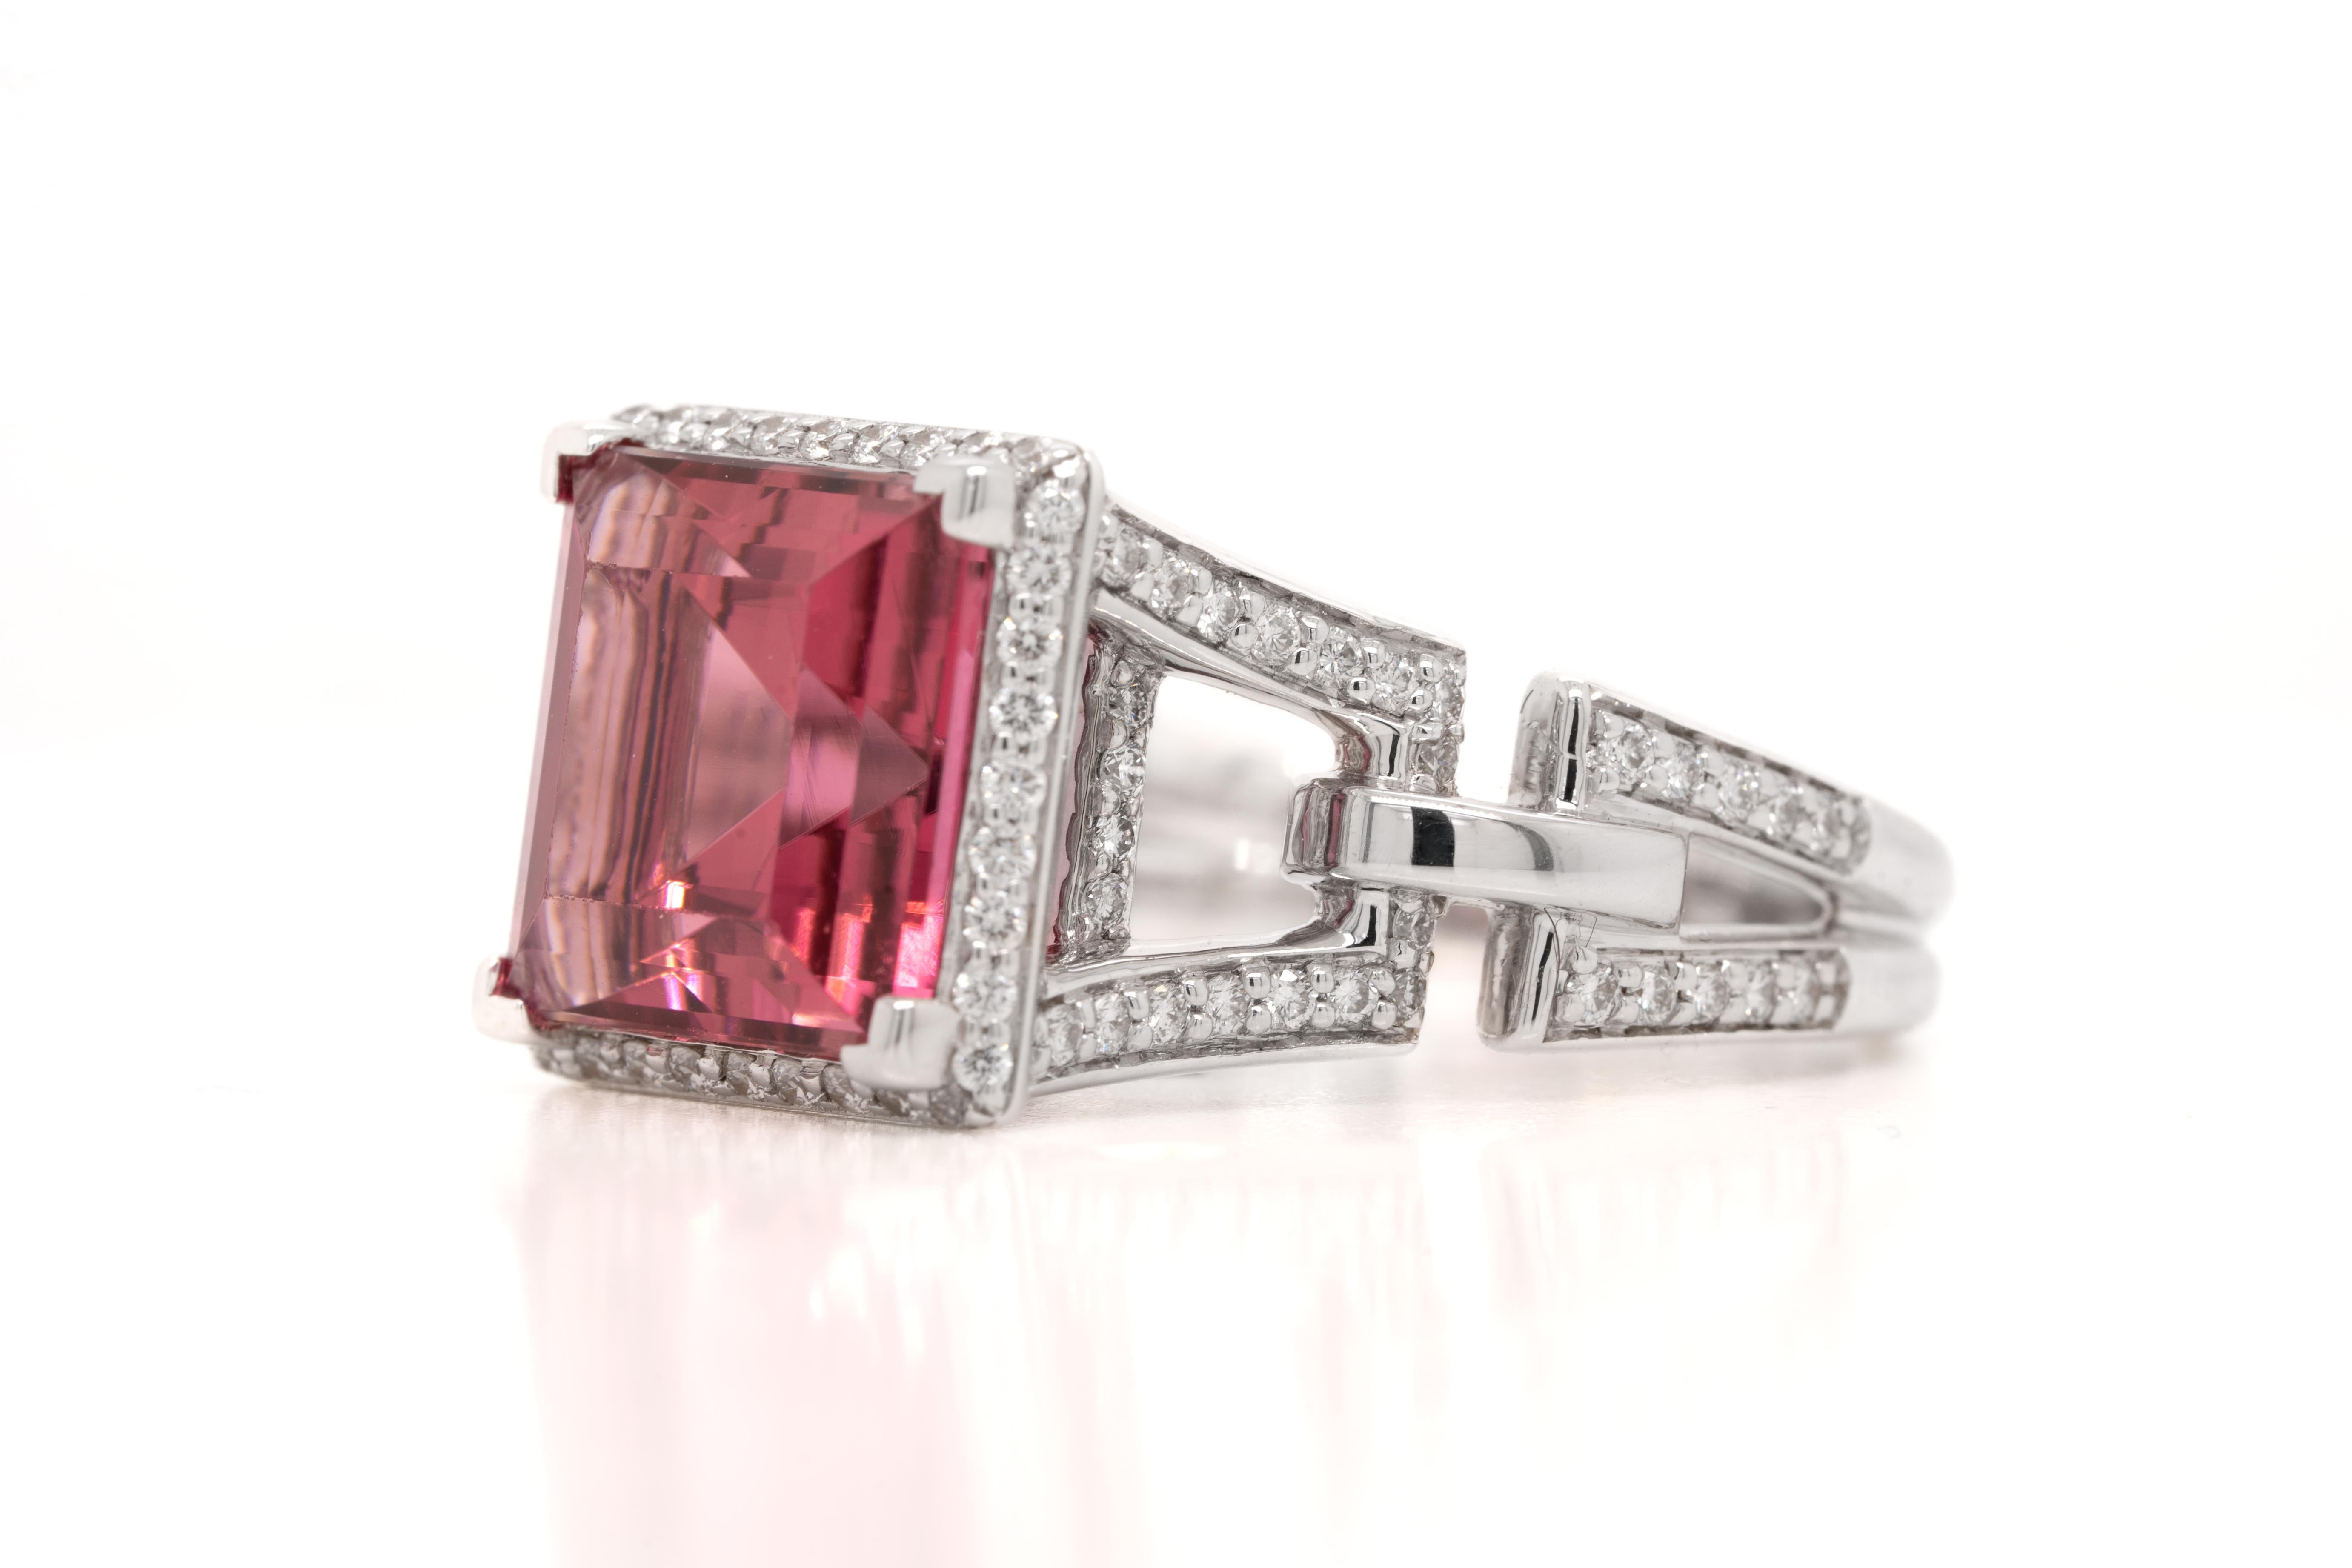 Tamir Designer engagement ring includes one squared vibrant pink tourmaline that is filled with brilliance. The unique design on the band is flushed with round brilliant cut diamonds that are flashing with life set in 18 karat white gold! This is a